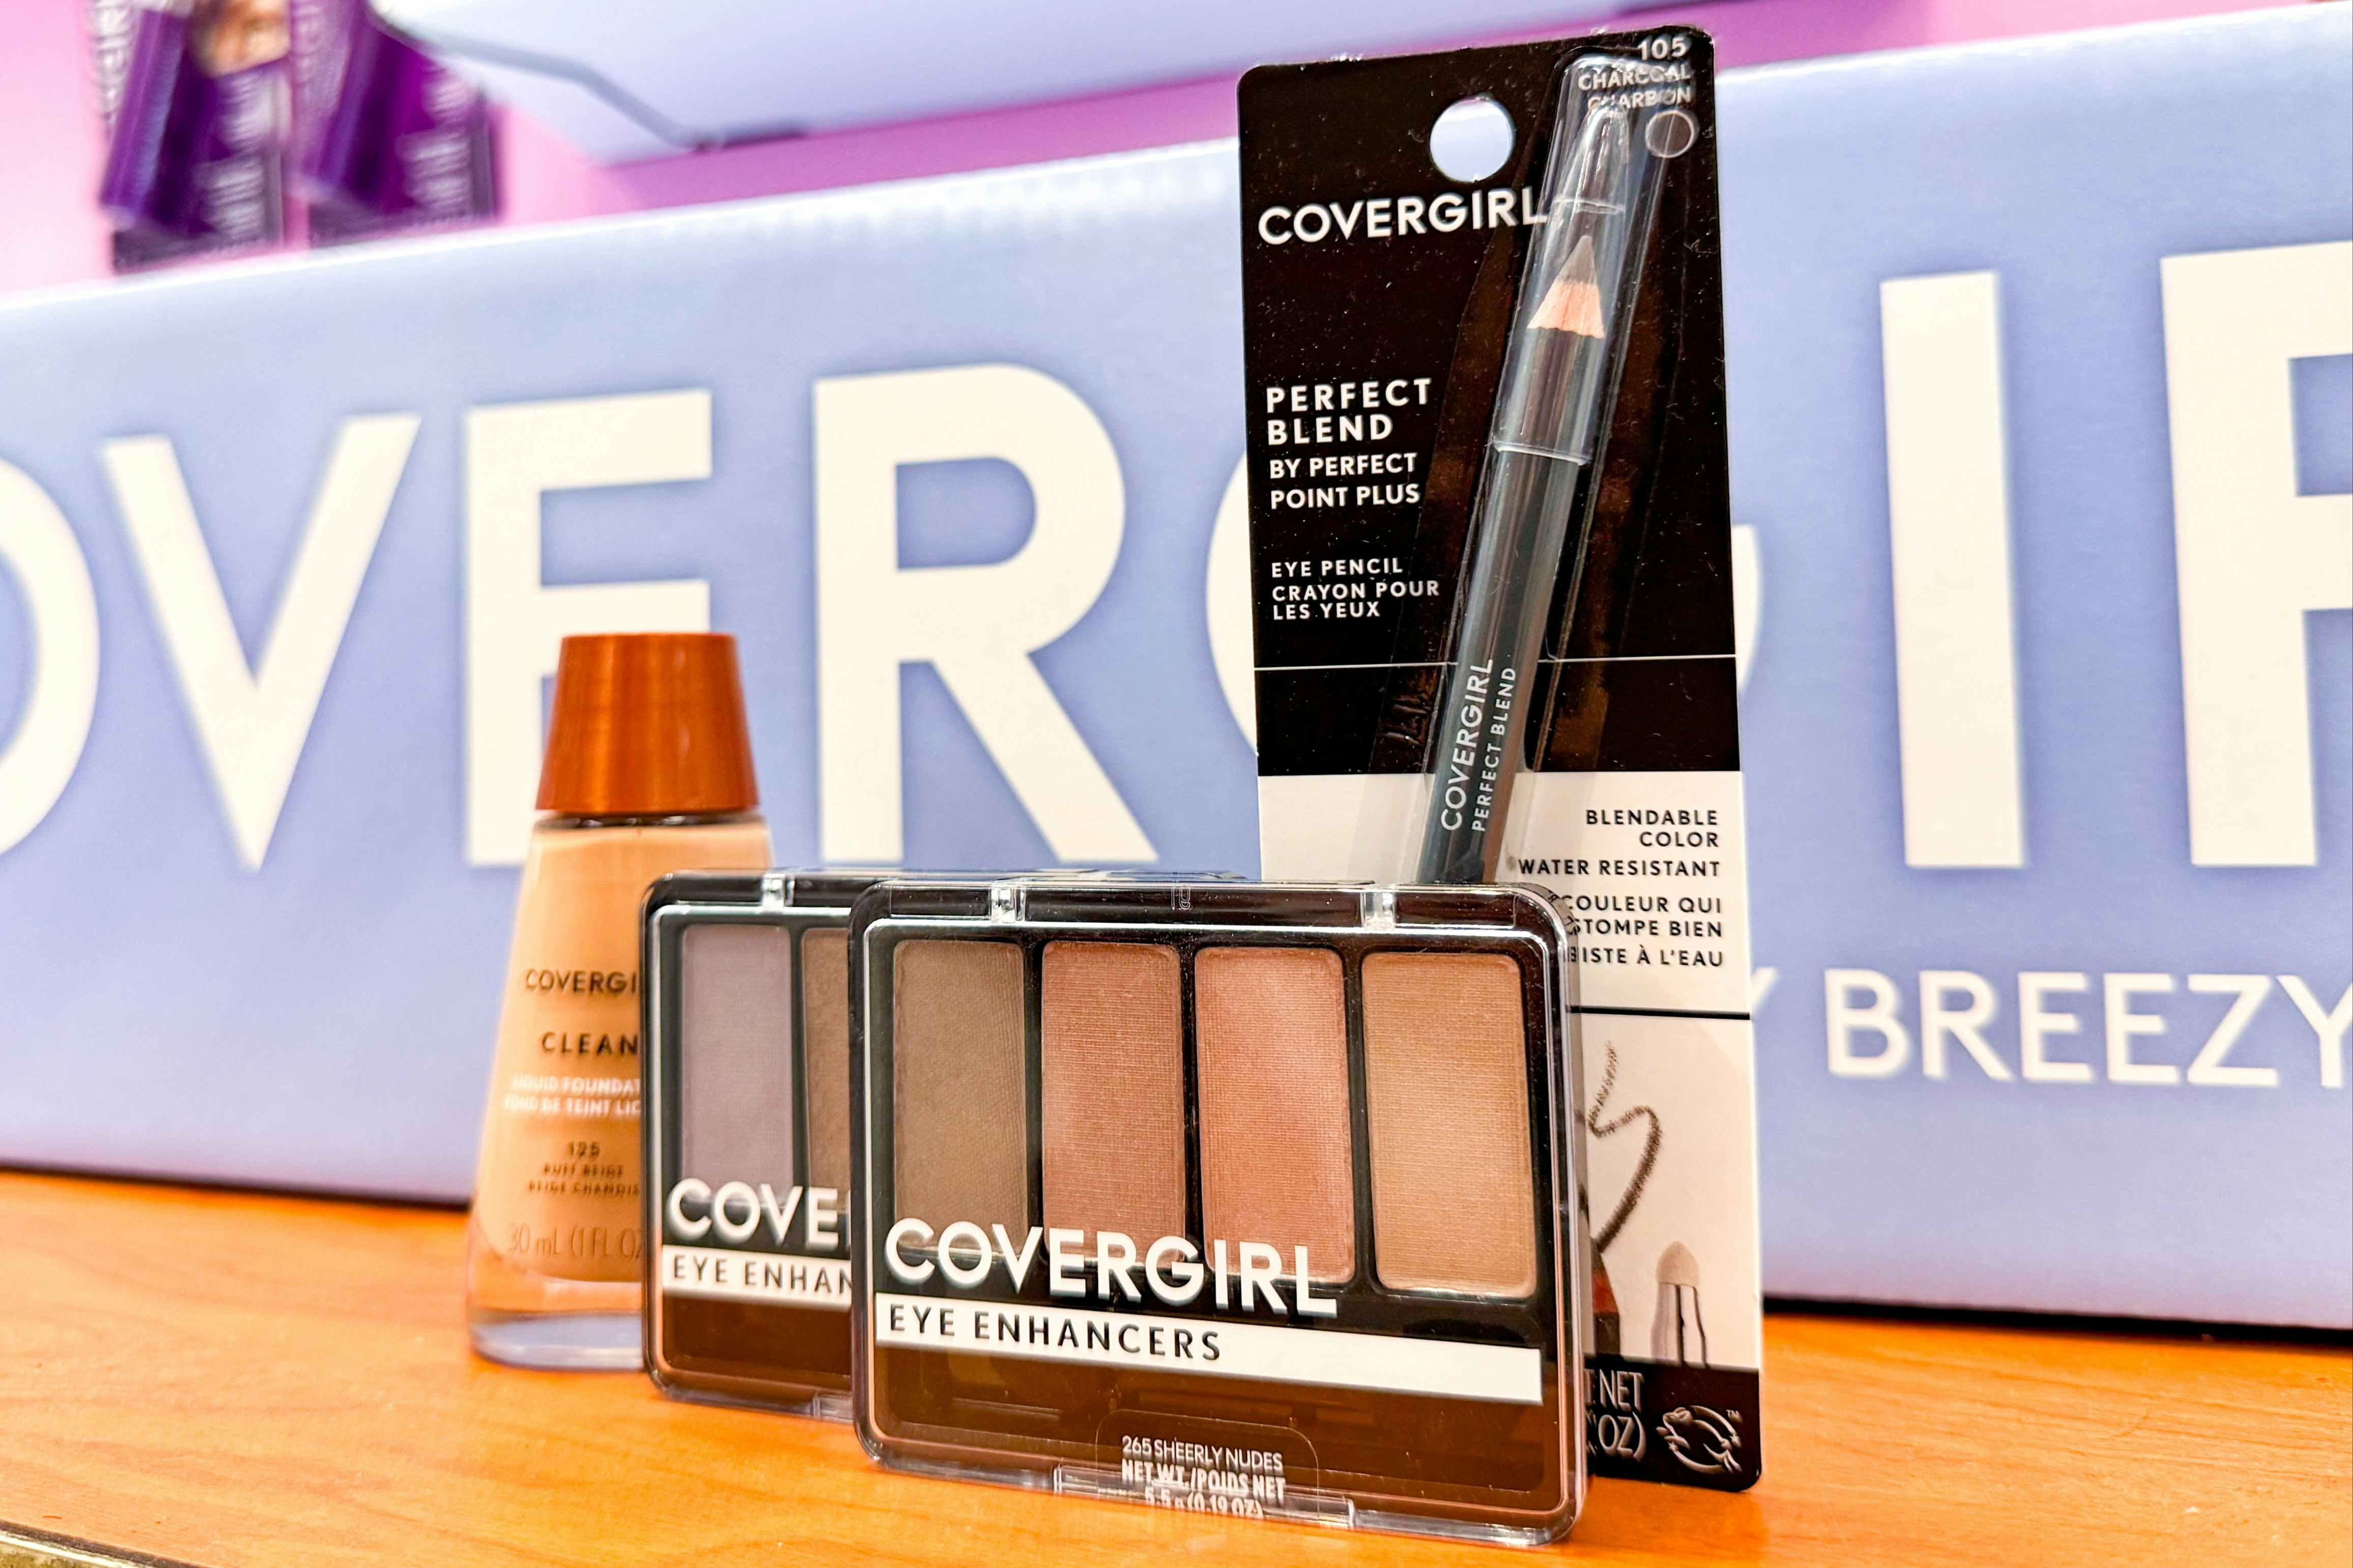 Shop Online and Score Free Covergirl Cosmetics at CVS 